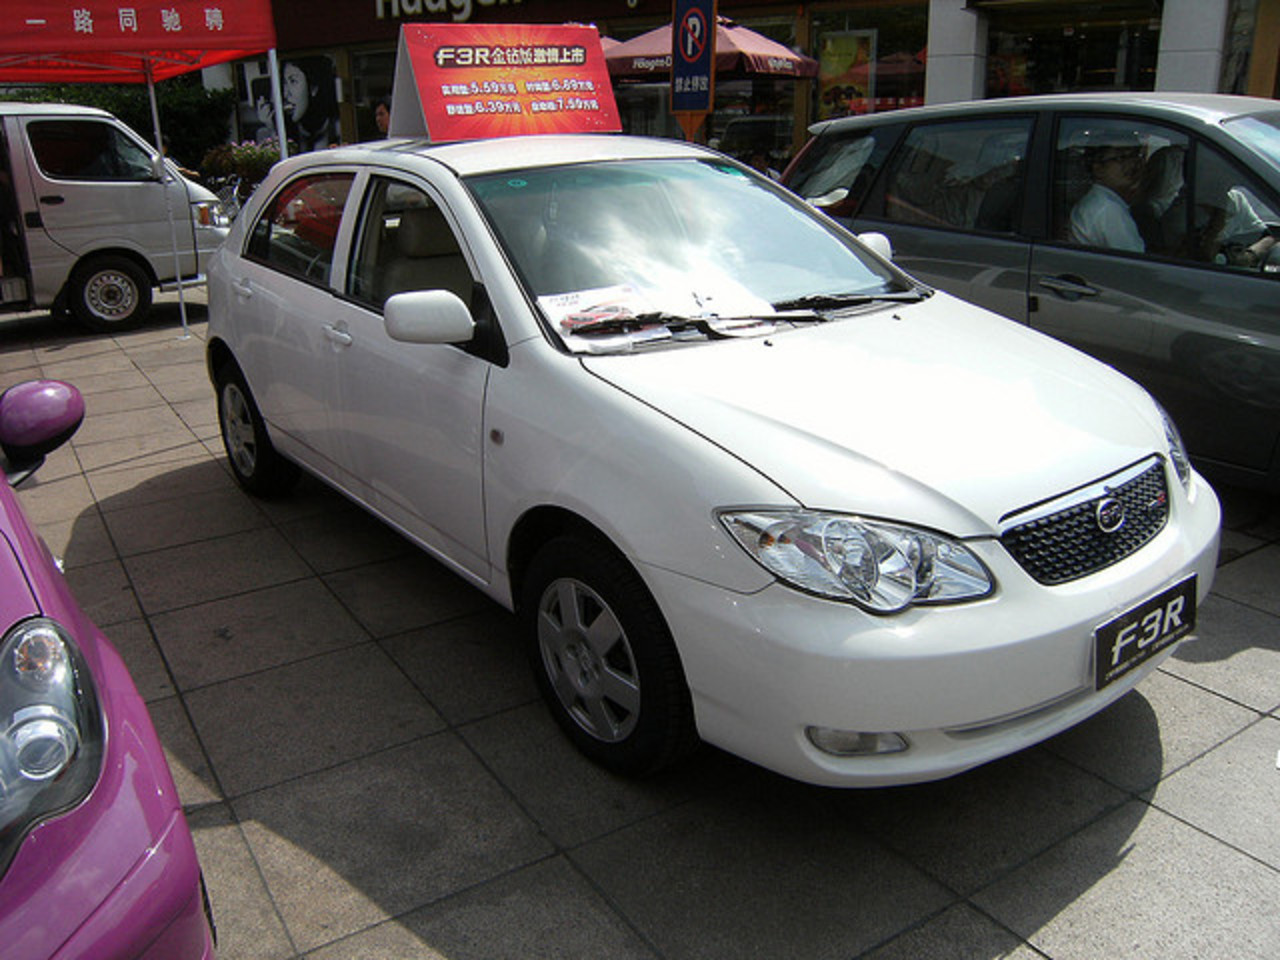 Byd F3R front | Flickr - Photo Sharing!